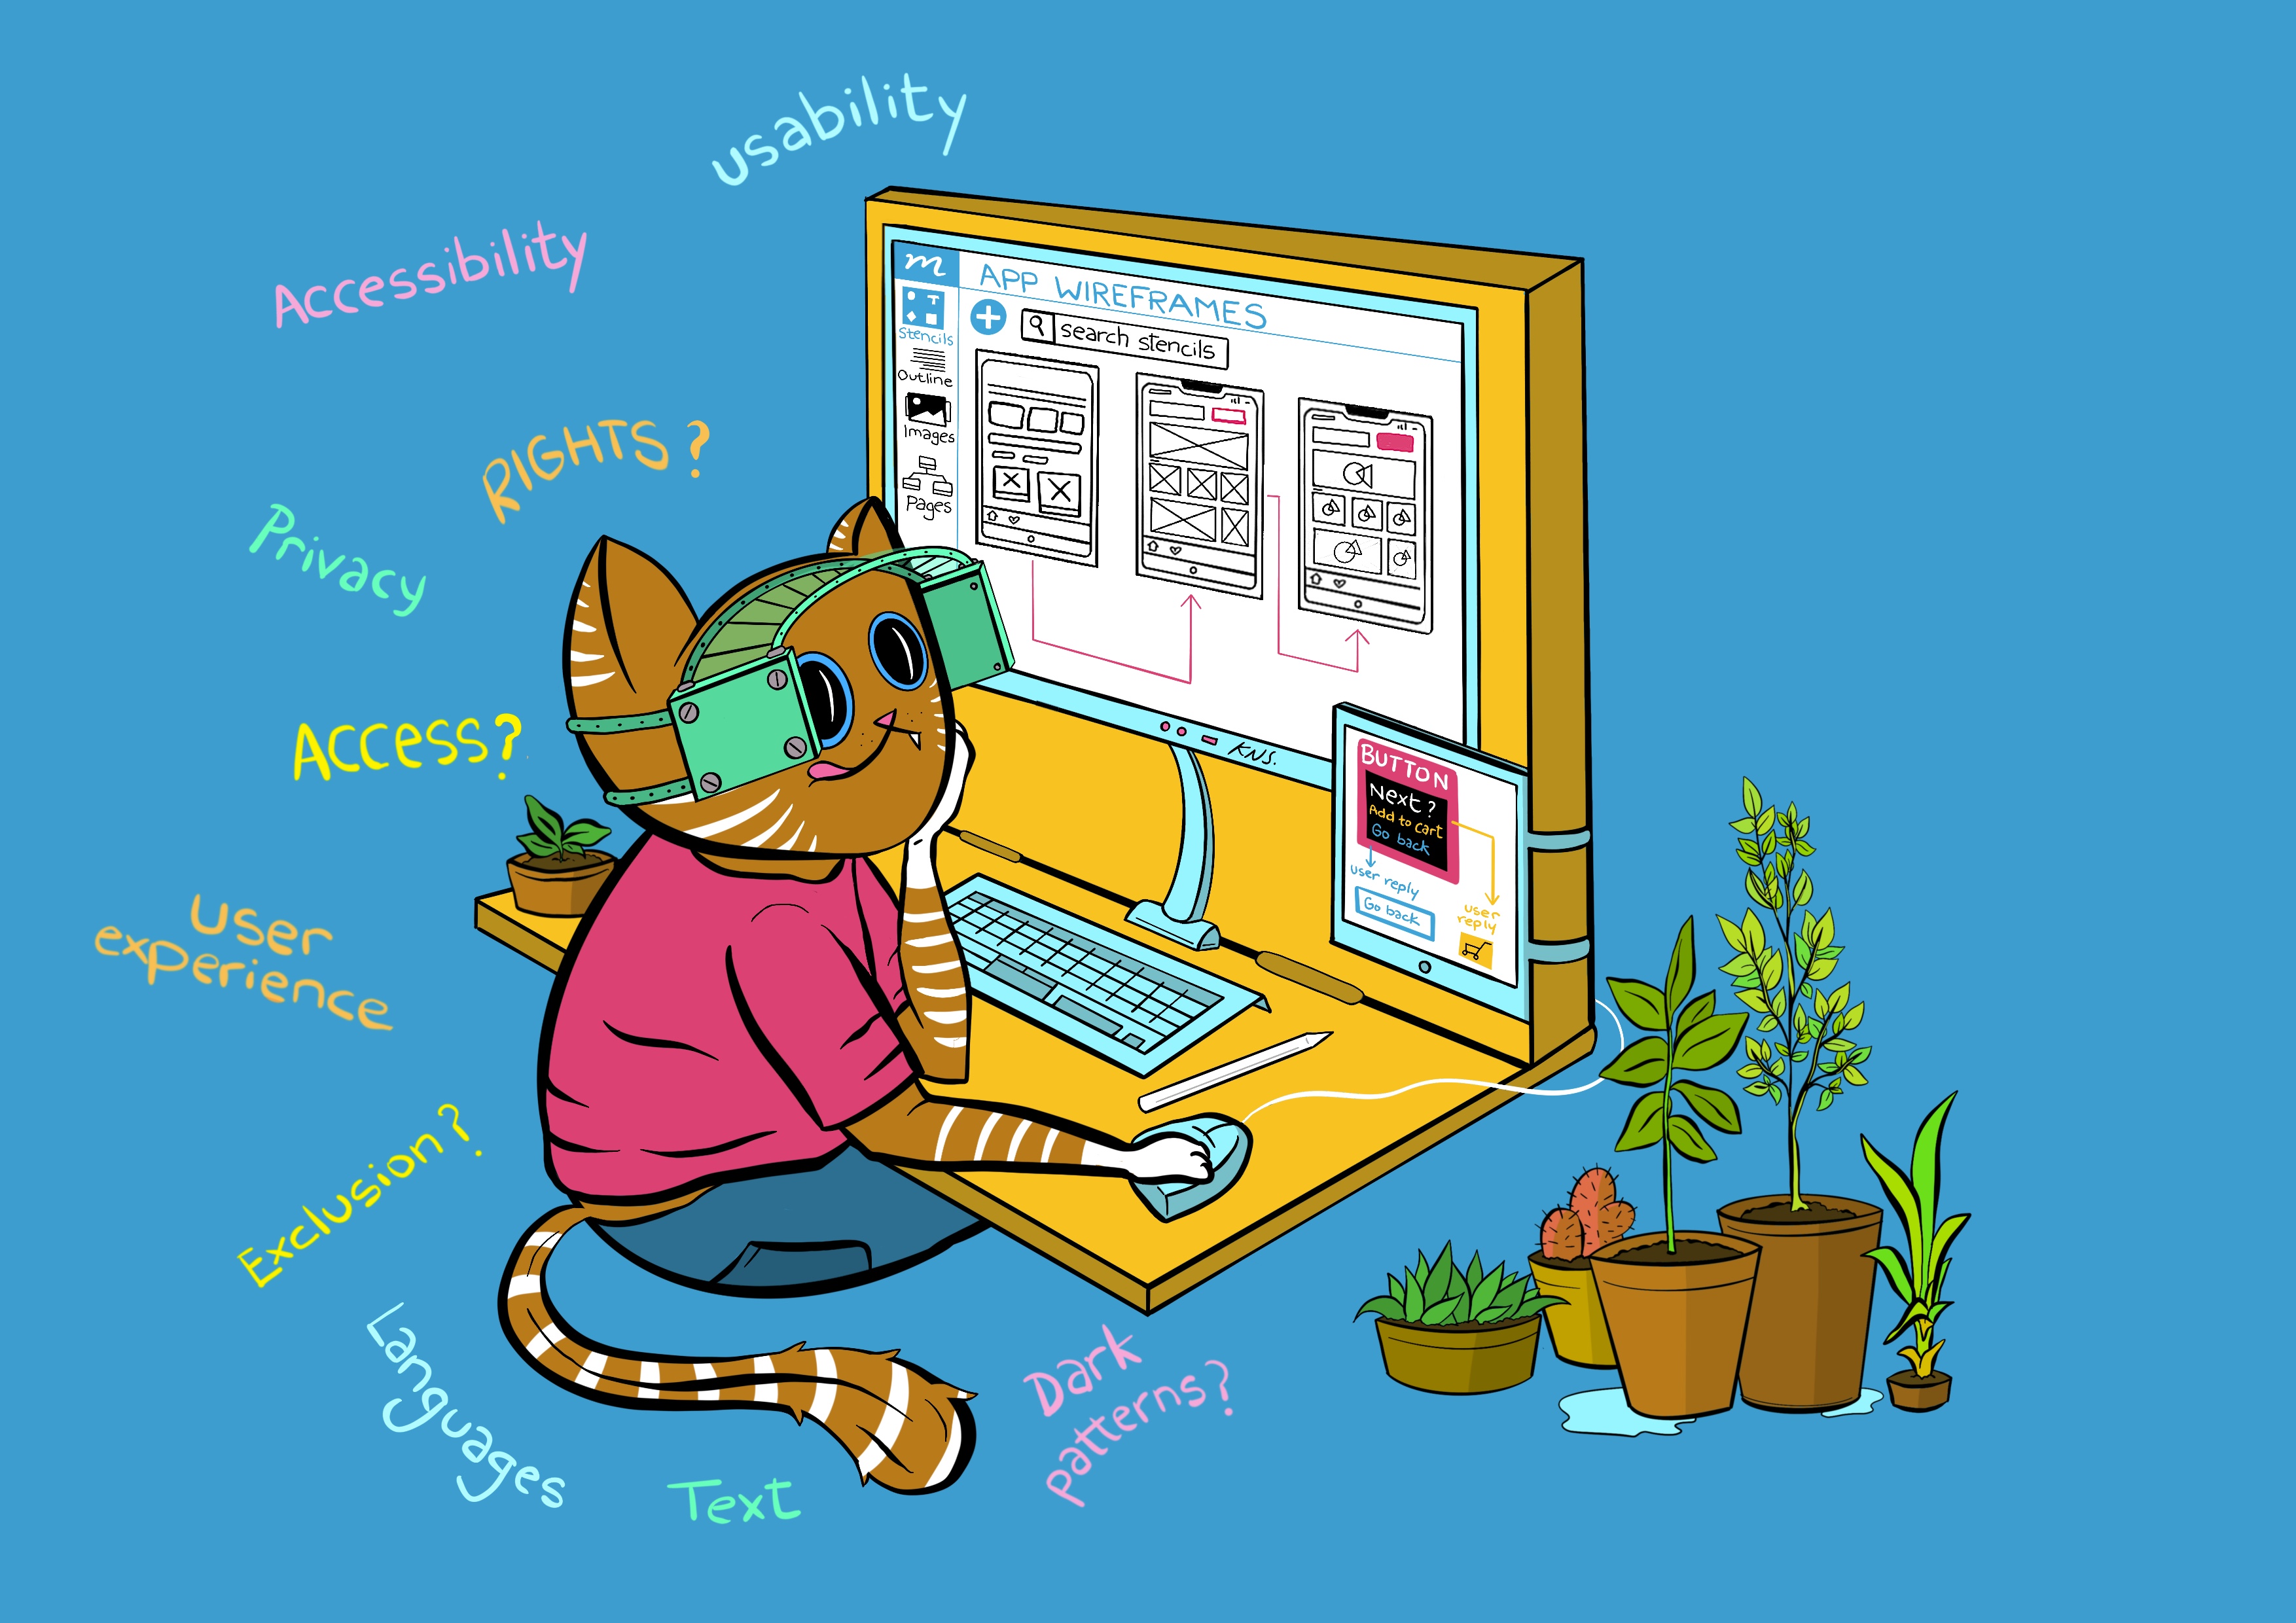 A cat shown as a person is sitting in front of a computer designing web applications. The cat is wearing blinders and is unable to see the words ‘usability’, ‘accessibility’, ‘rights’, ‘privacy?’, ‘access?’, ‘user experience’, ‘exclusion?’, ‘languages’, ‘text’, ‘dark patterns?’ floating around.